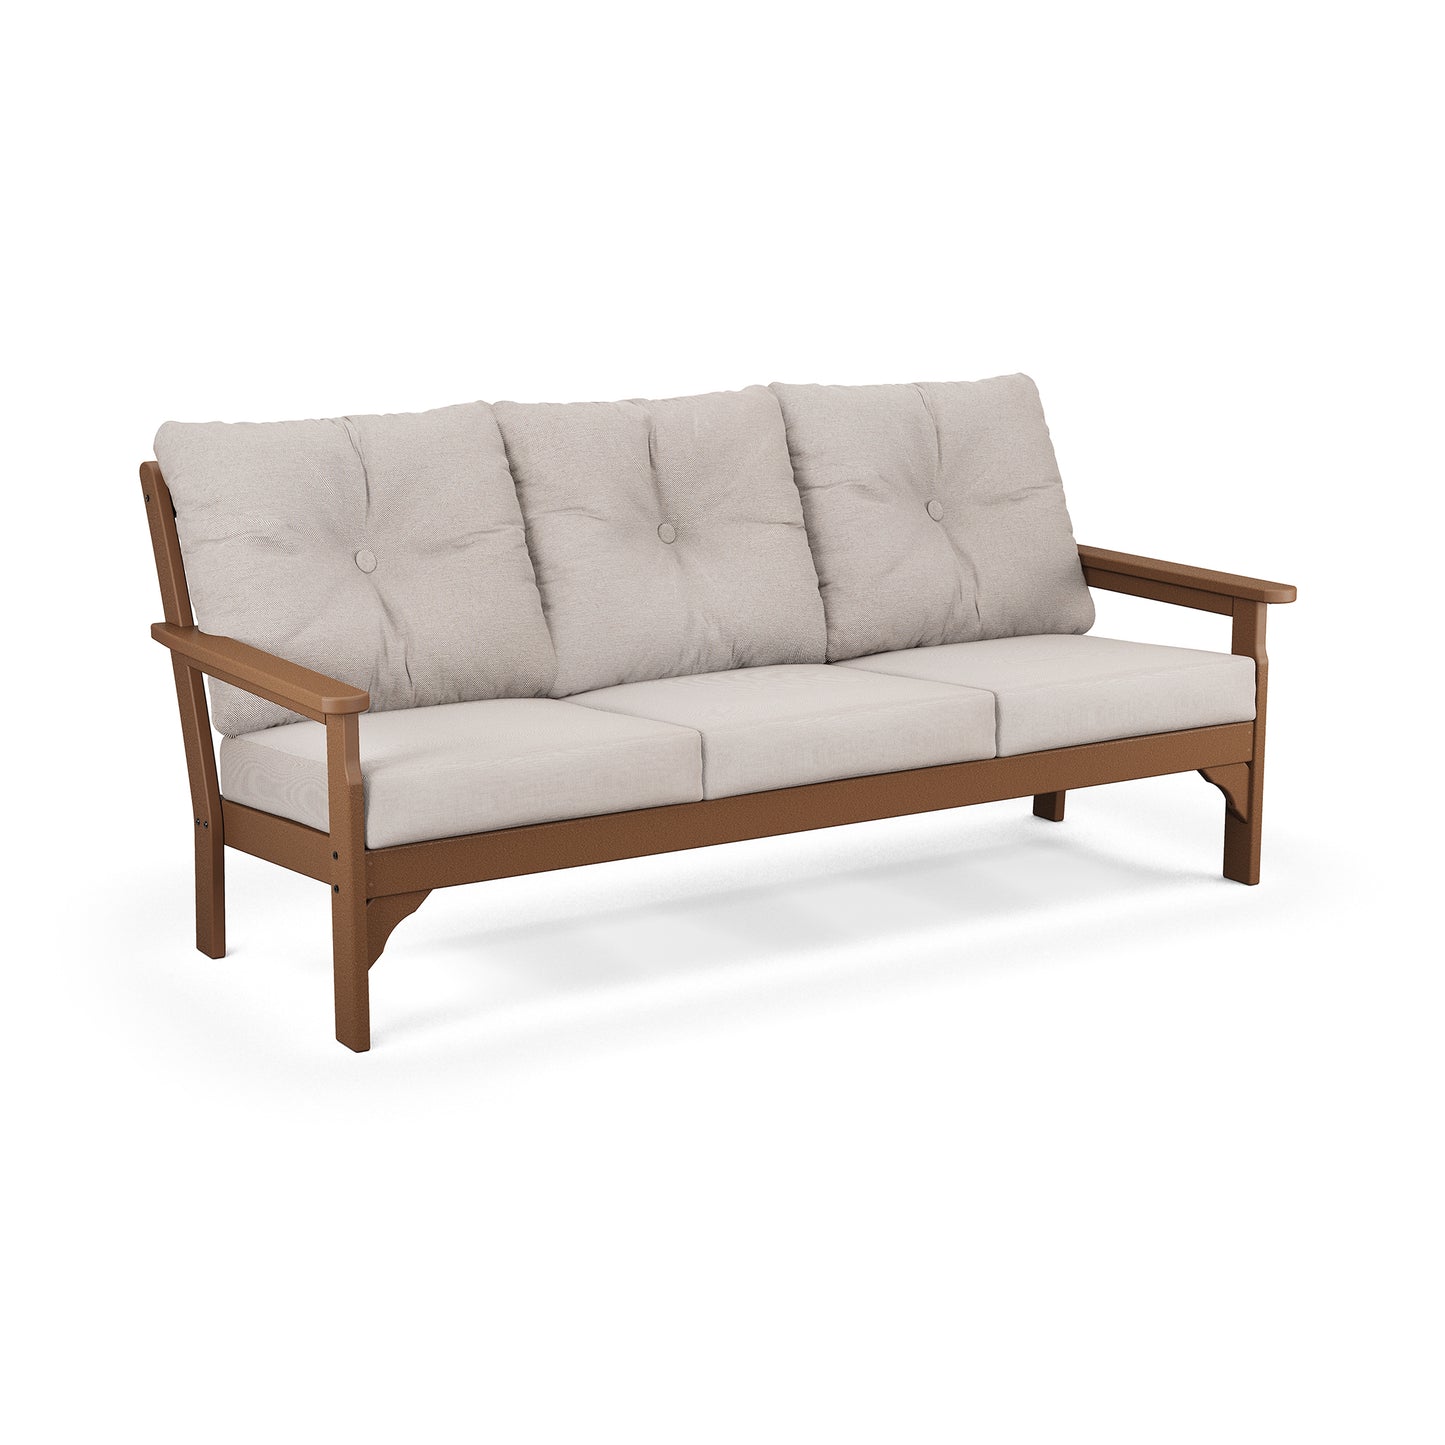 A three-seater cushioned POLYWOOD Vineyard Deep Seating Sofa with a POLYWOOD® frame and beige upholstery on a white background. The sofa features a simple, contemporary design with tufted back.